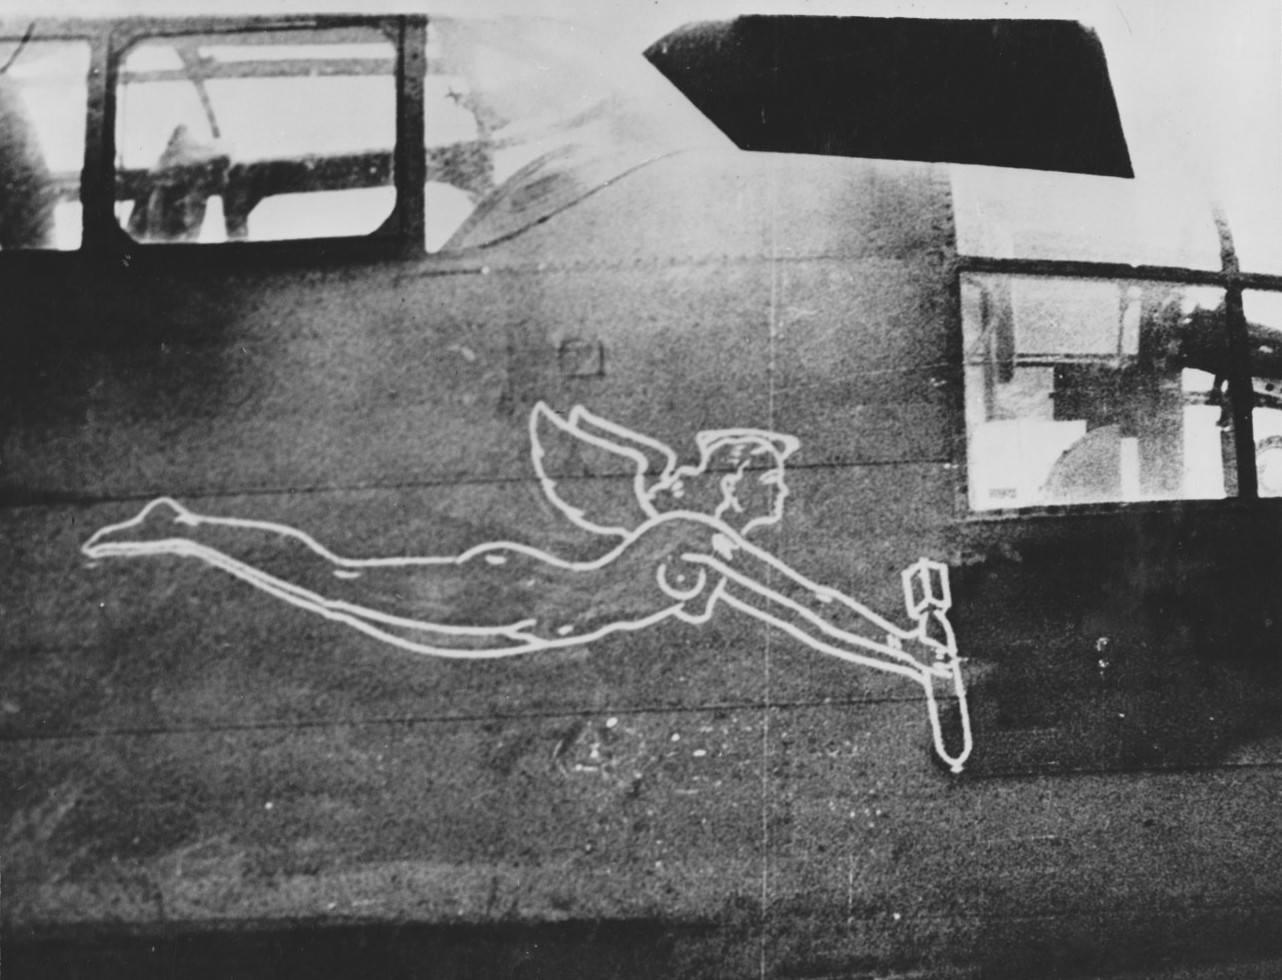 Nose art of B-25B Mitchell bomber 'Hari Carrier' as she sat on the flight deck of the carrier Hornet days before embarking on the Doolittle Raid, Apr 1942, photo 1 of 2